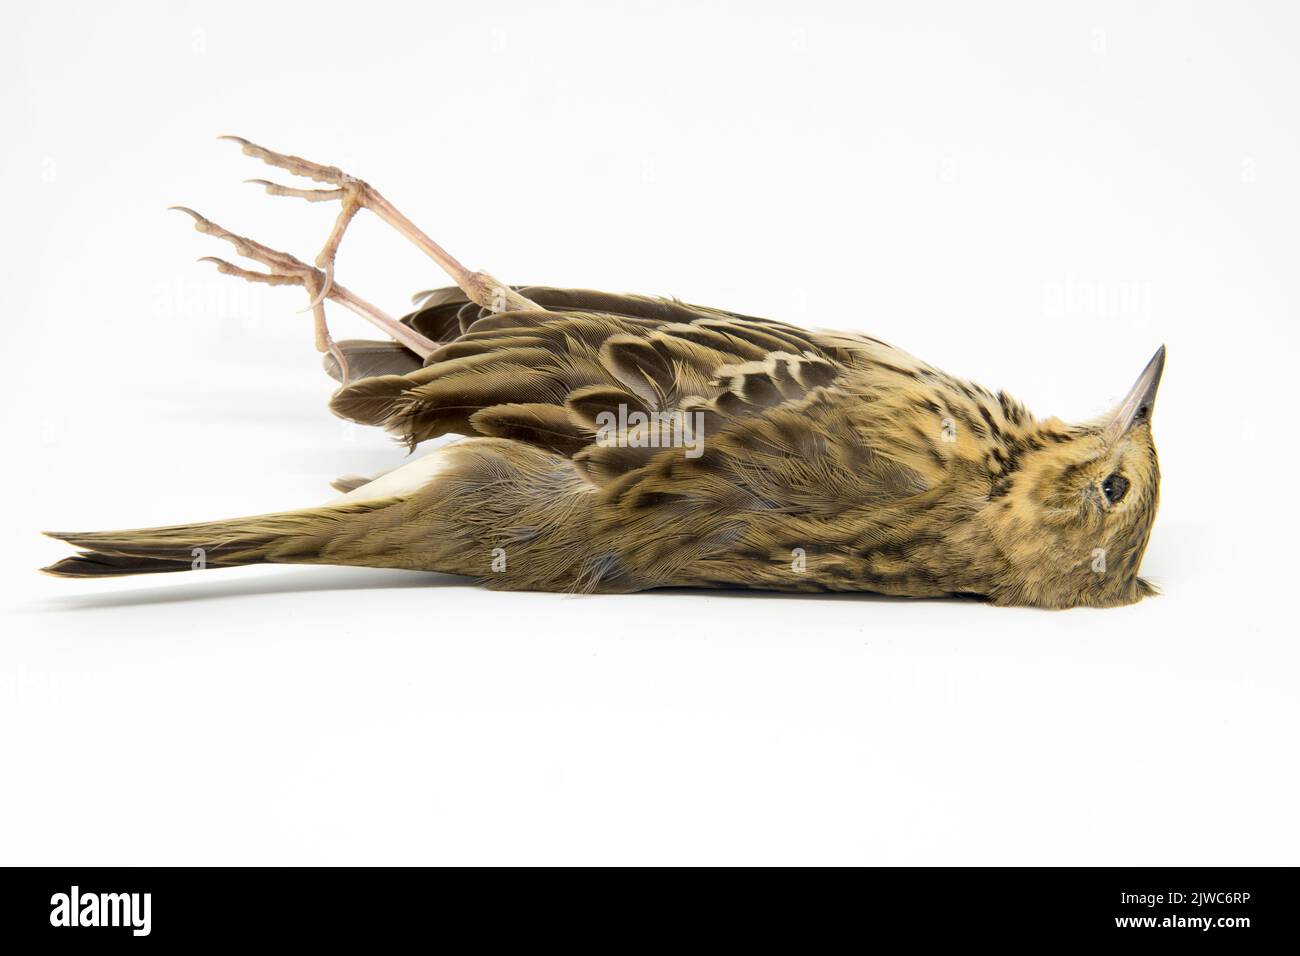 Dead bird. Deceased Tree Pipit in Latin Anthus Trivialis. White background. The body of dead animal. Little European species. Stock Photo